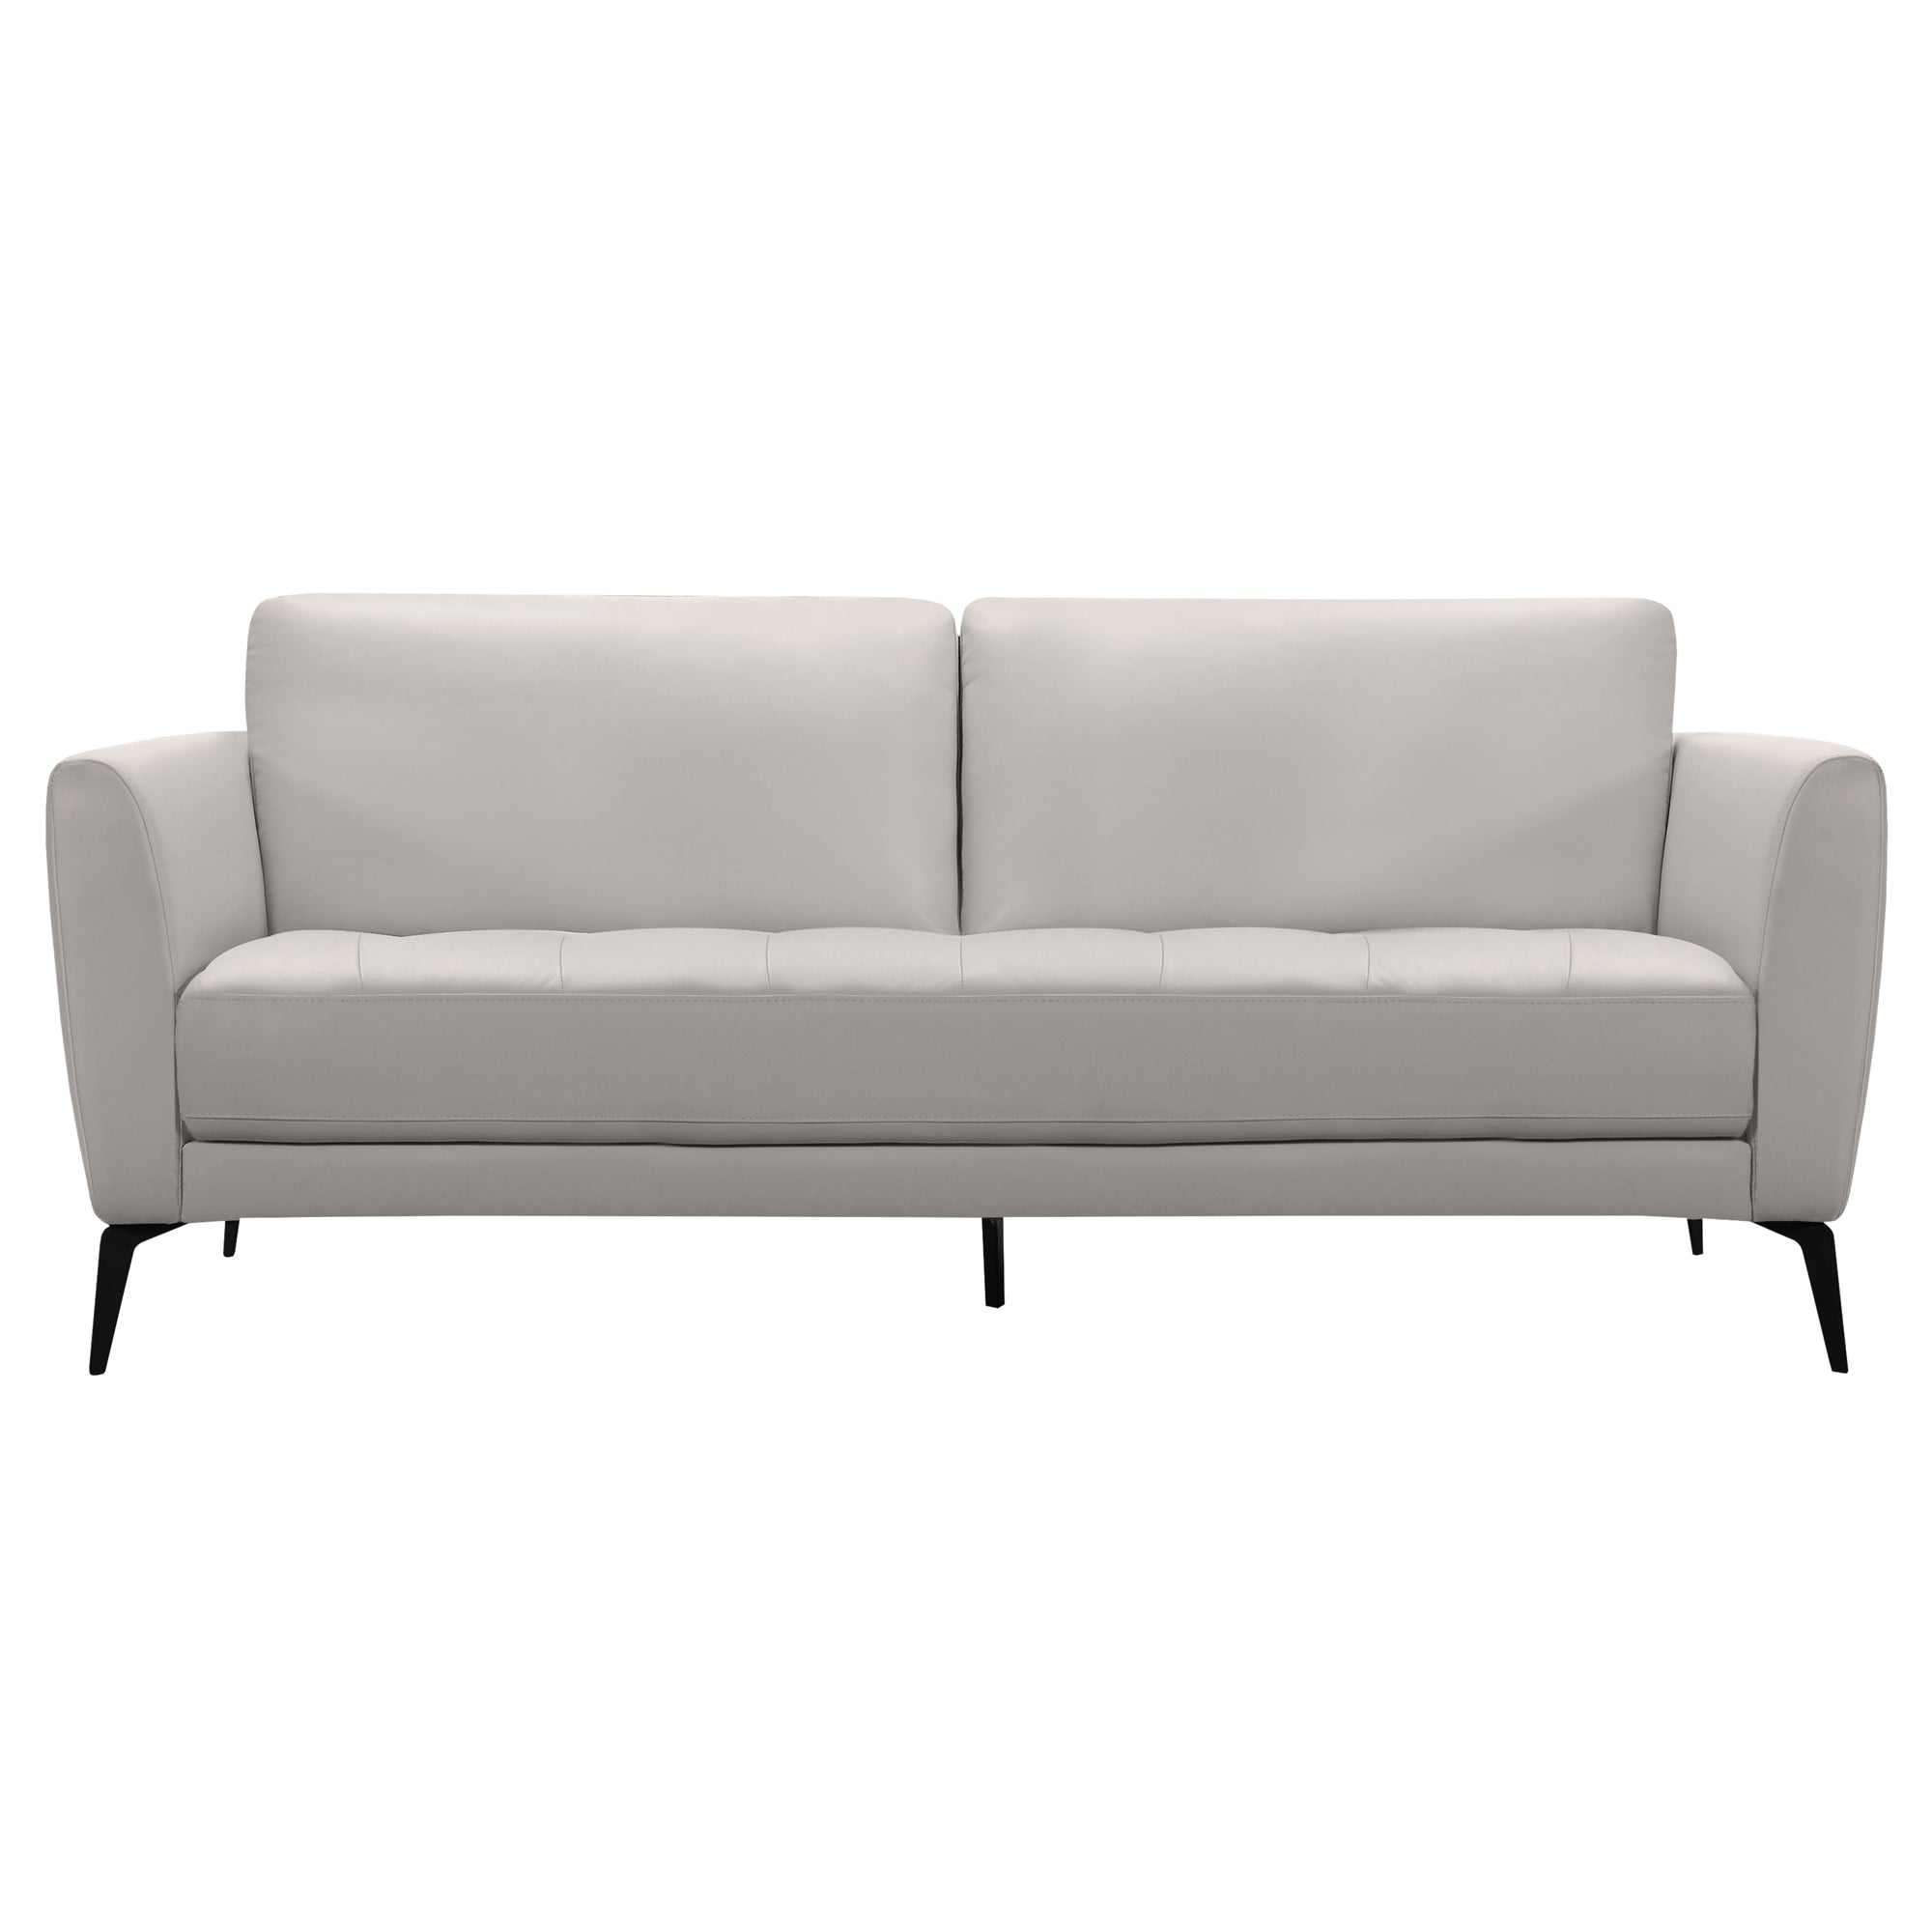 Armen Living Lchp3gr Hope Contemporary Sofa In Genuine Dove Grey Leather With Black Metal Legs